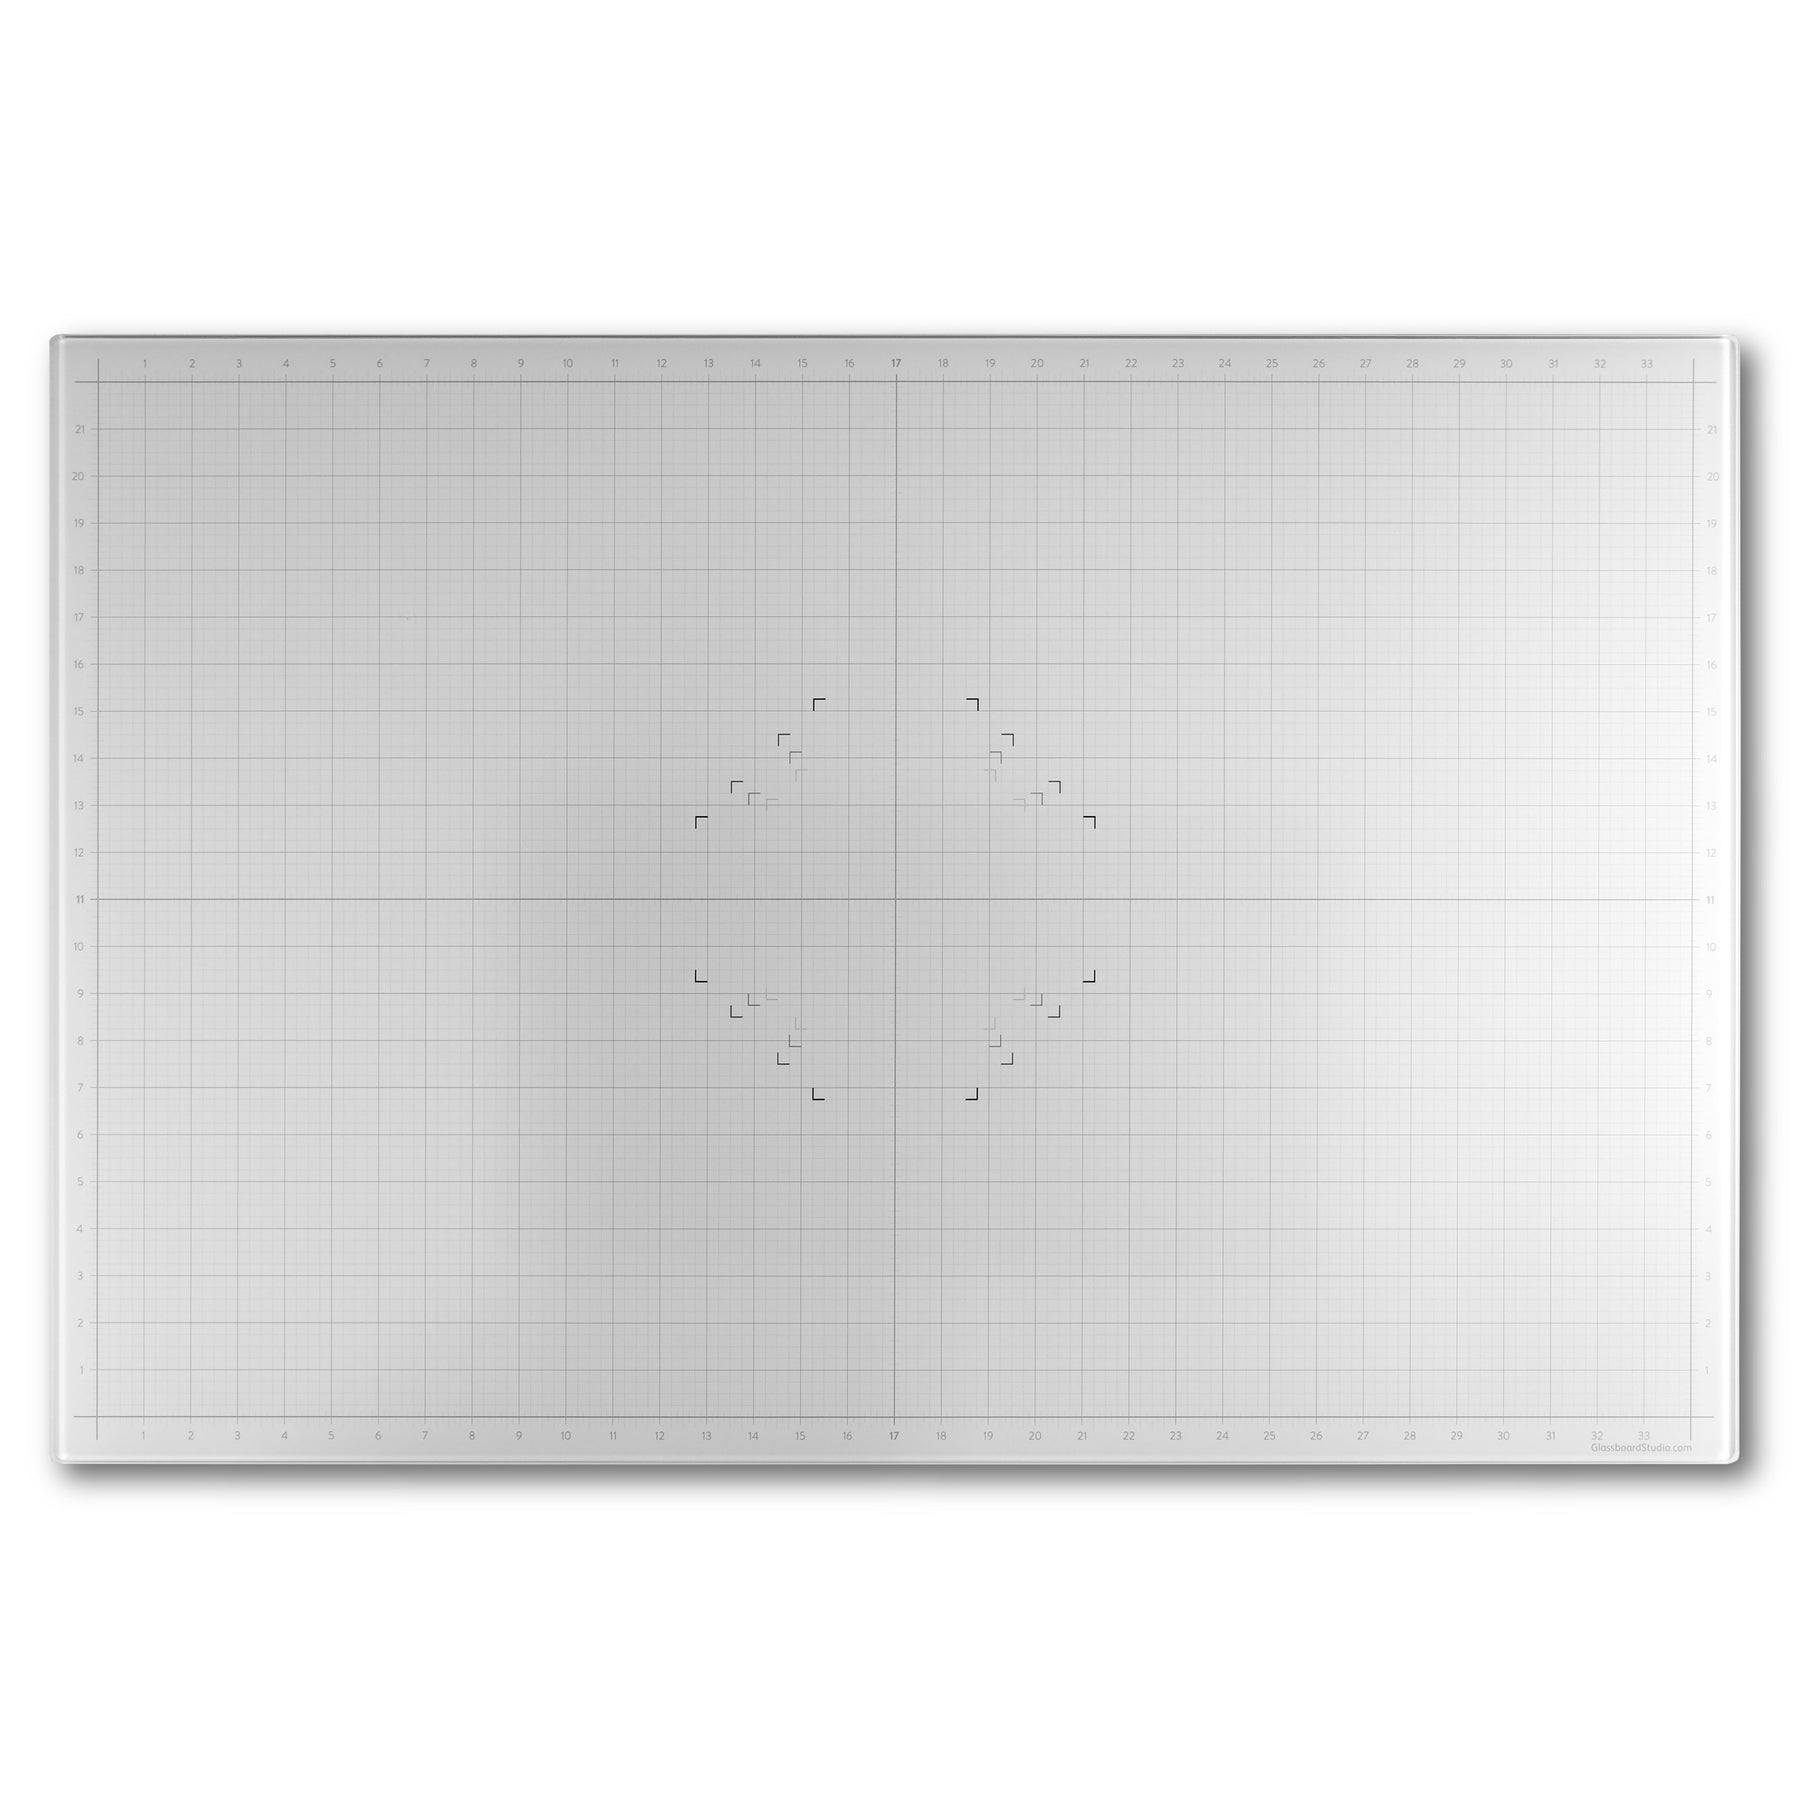 9x12 Magnetic Glass Craft Mat - SITC Exclusive